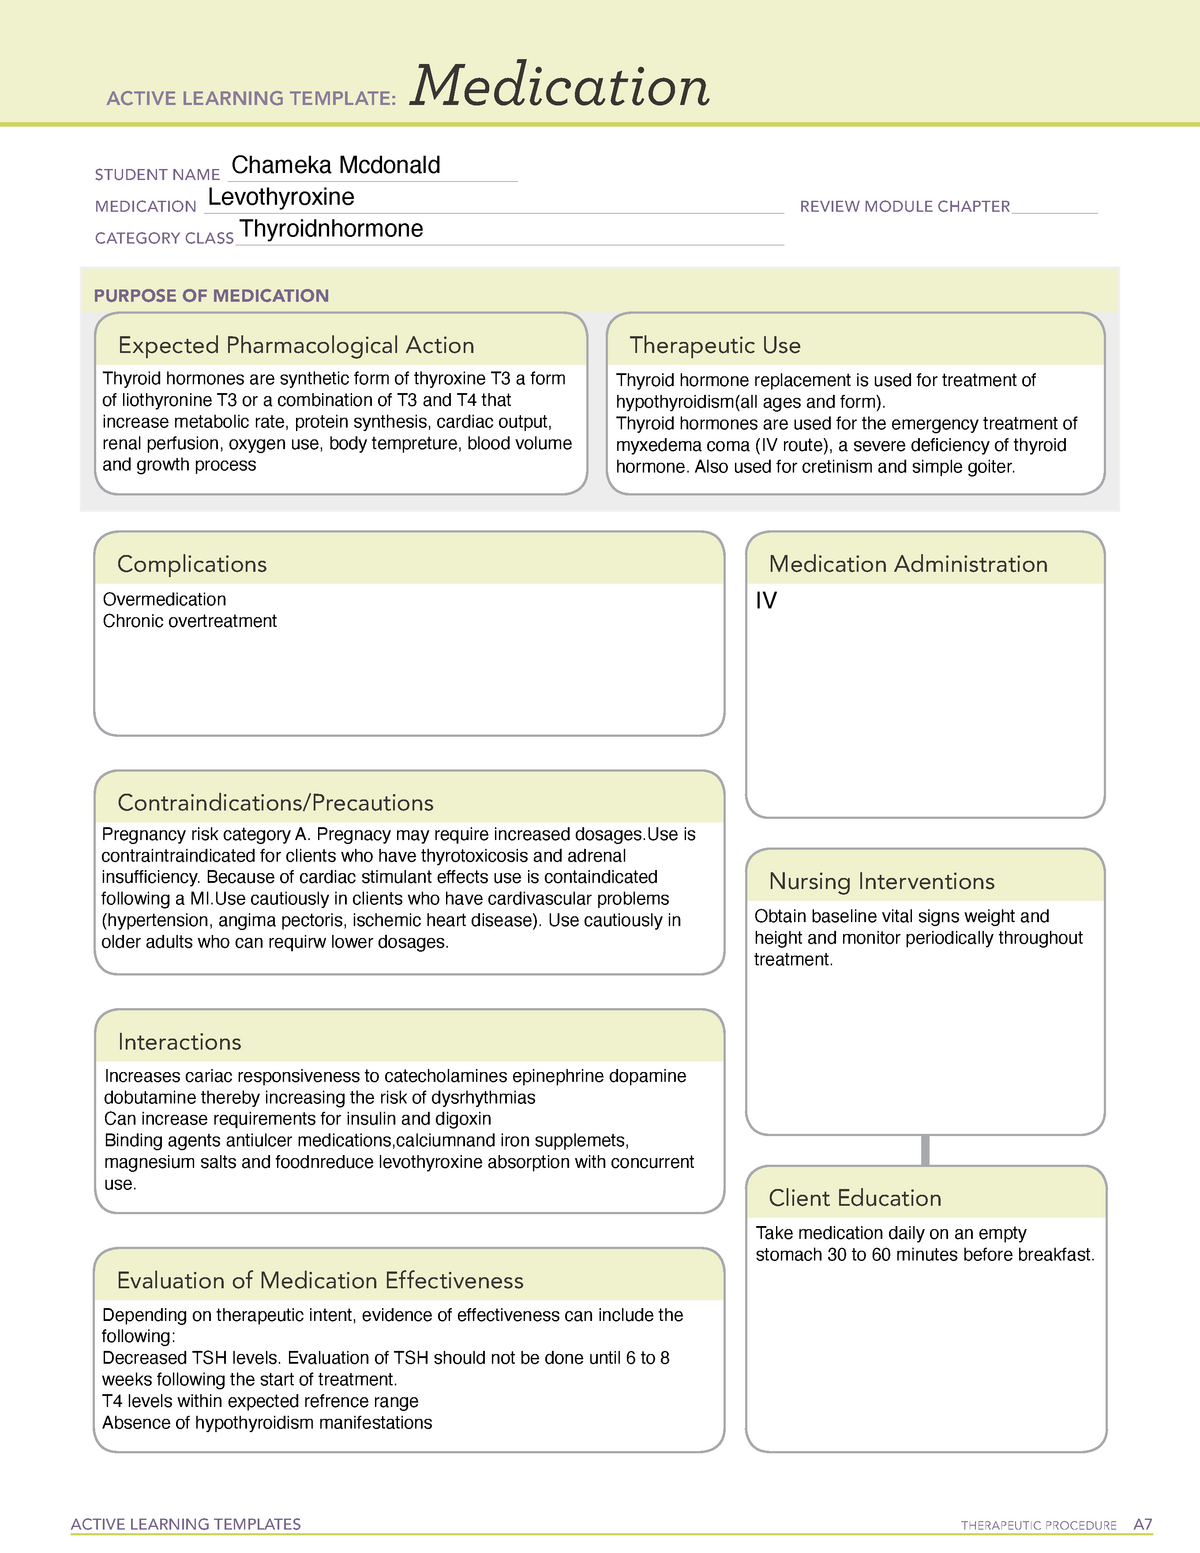 Levothyroxine med card ACTIVE LEARNING TEMPLATES THERAPEUTIC